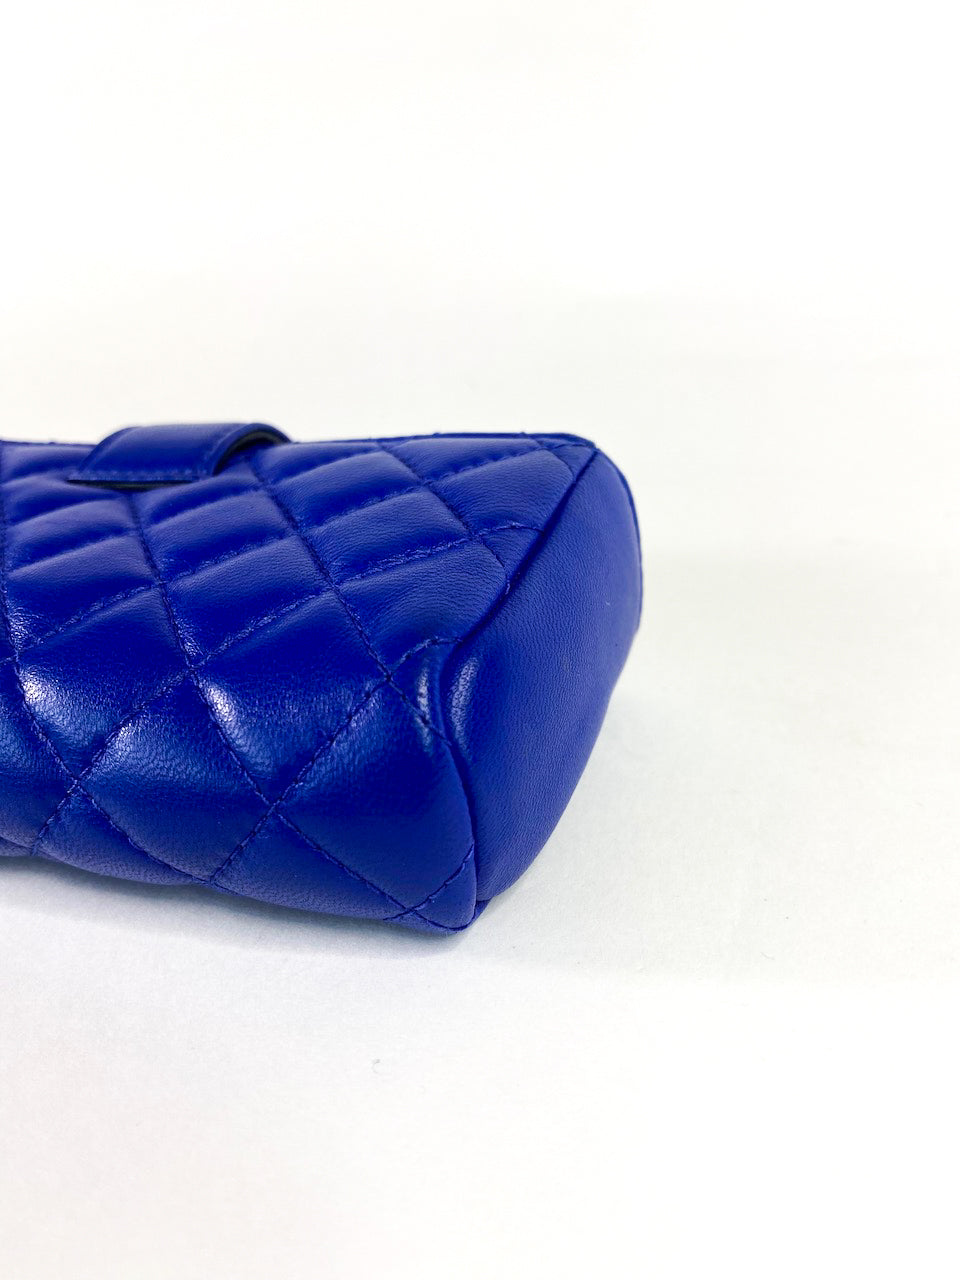 Chanel Blue Lambskin Leather Phone Holder/Pouch - As Seen on Instagram Live 12/07/20 - Siopaella Designer Exchange